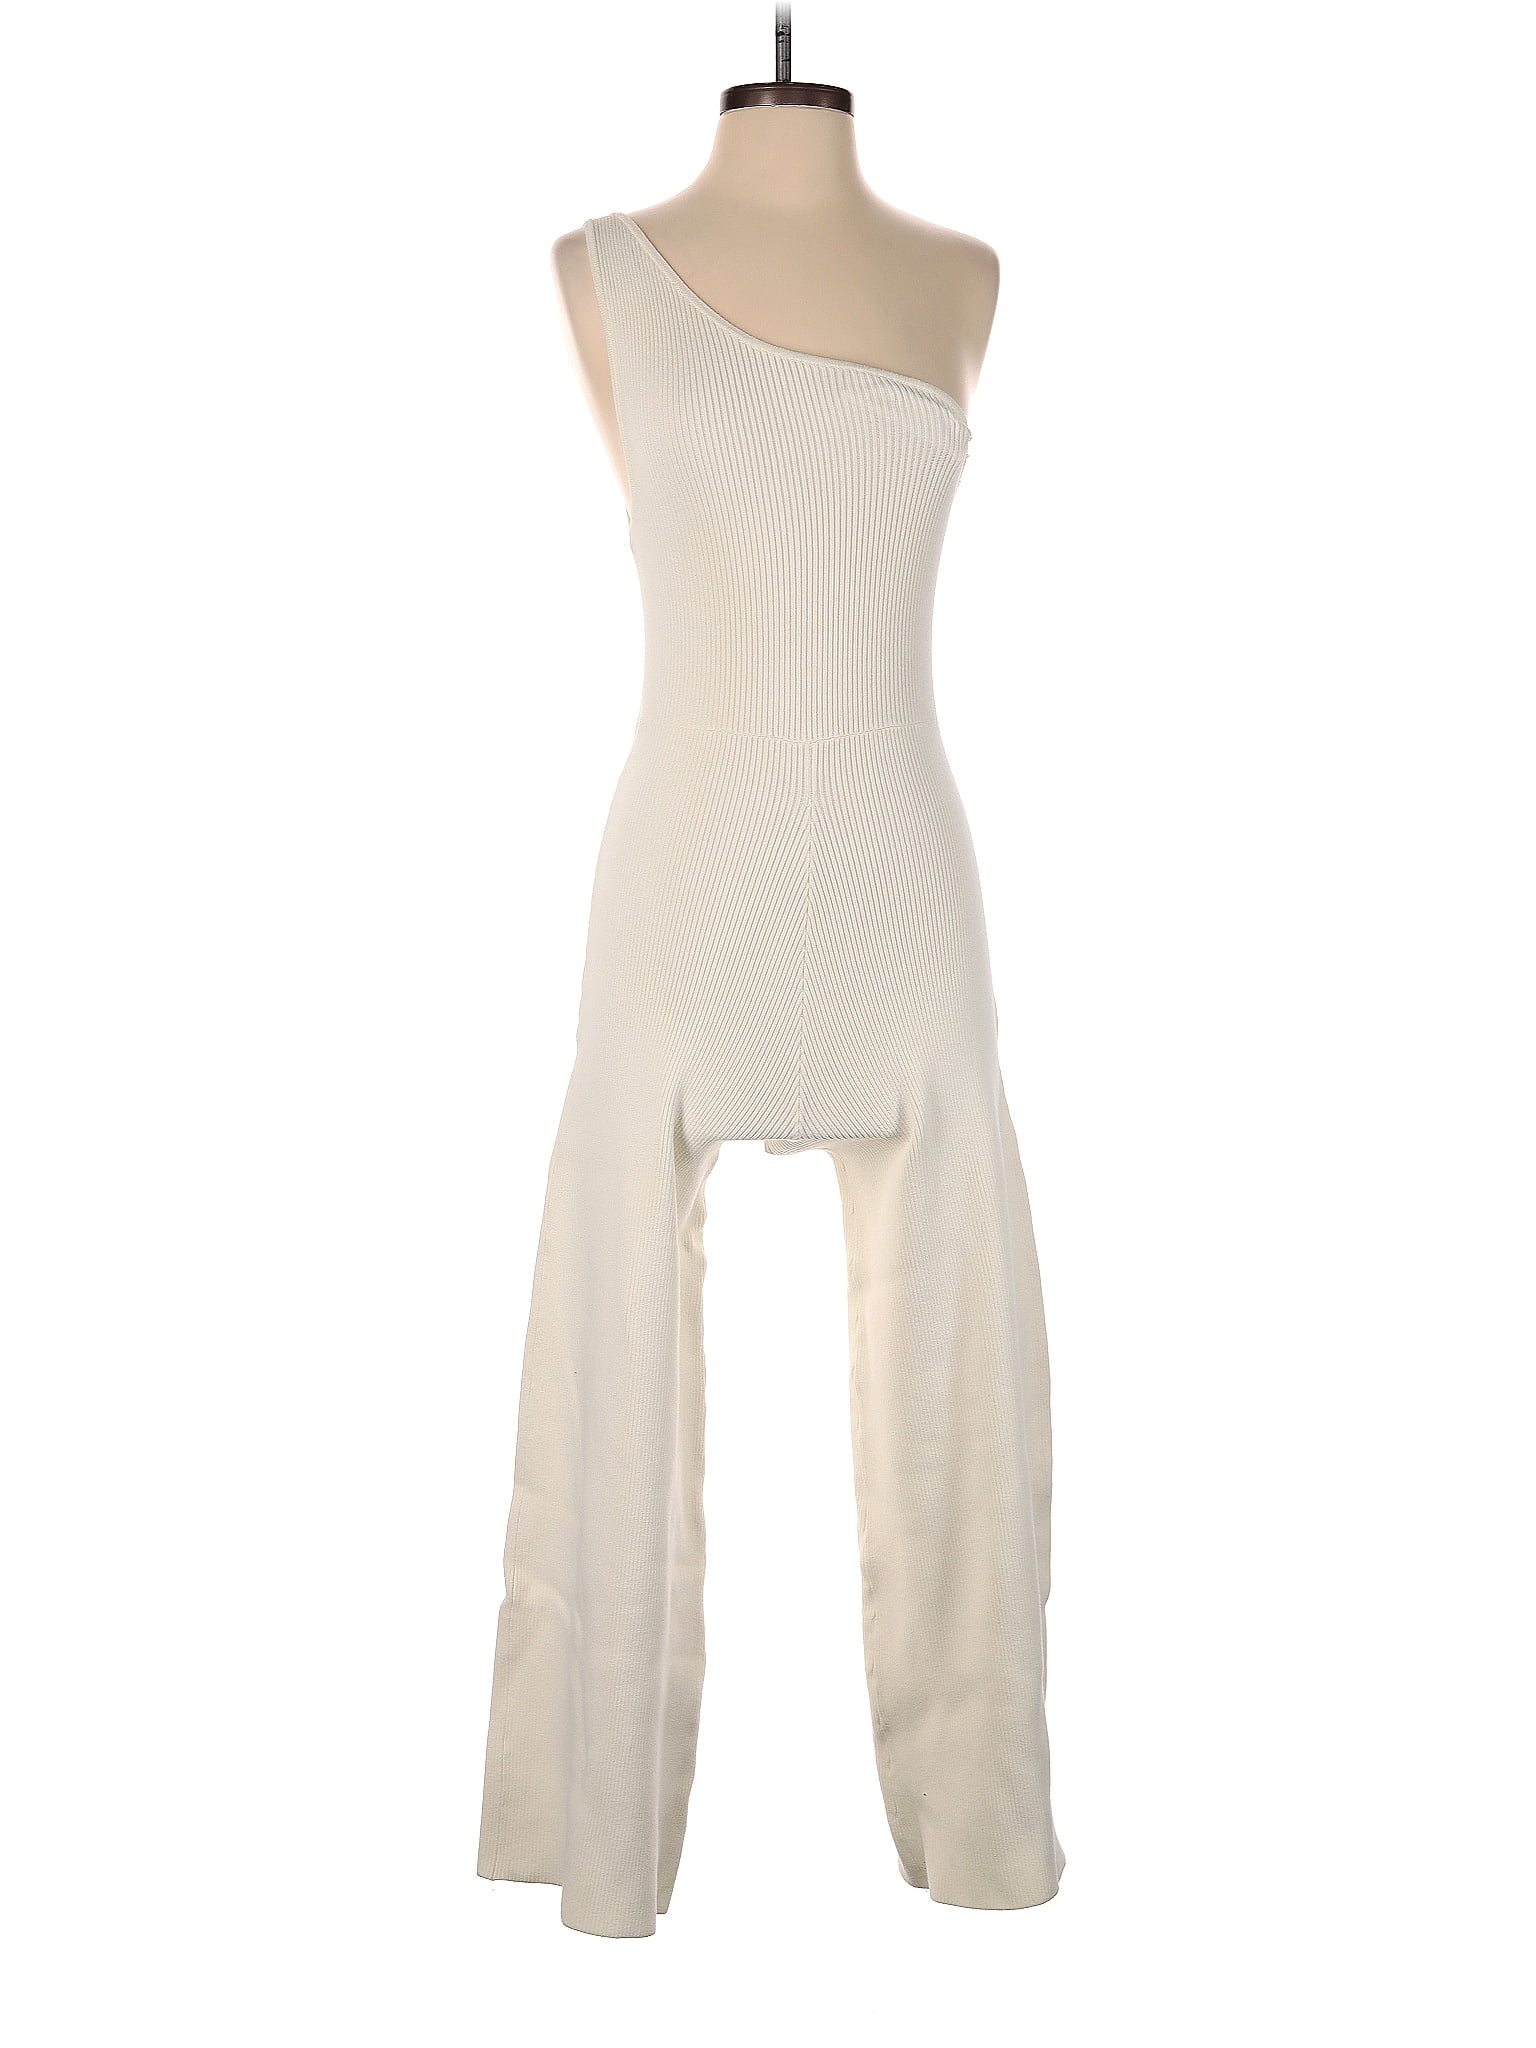 Wild Fable Ivory Sweatpants Size L - 41% off